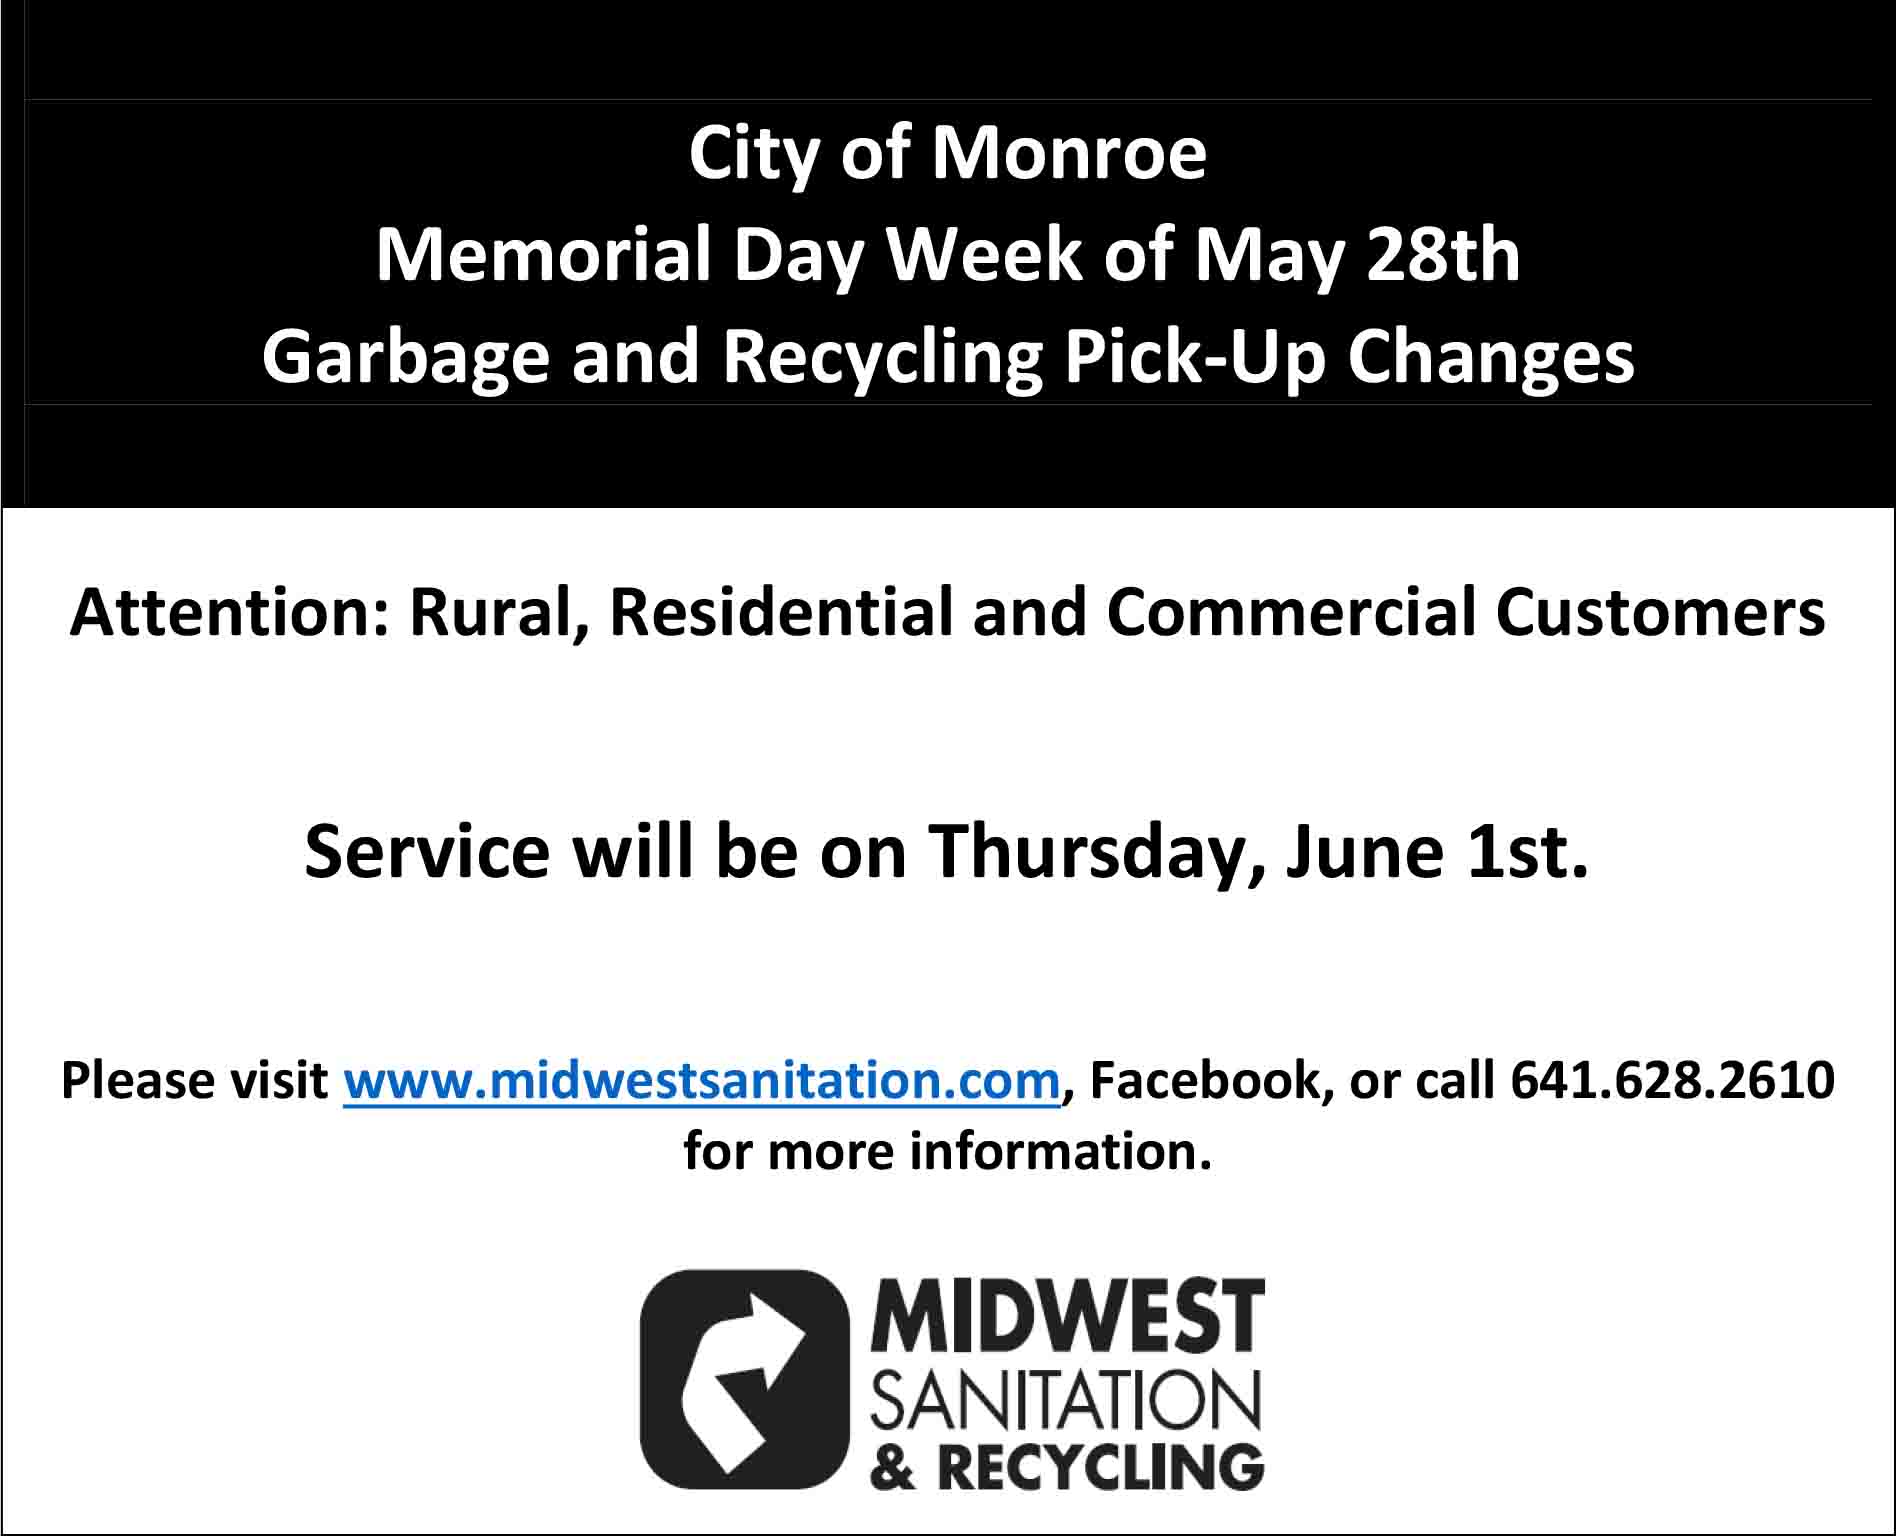 Memorial Day Garbage / Recycling Pickup Changes